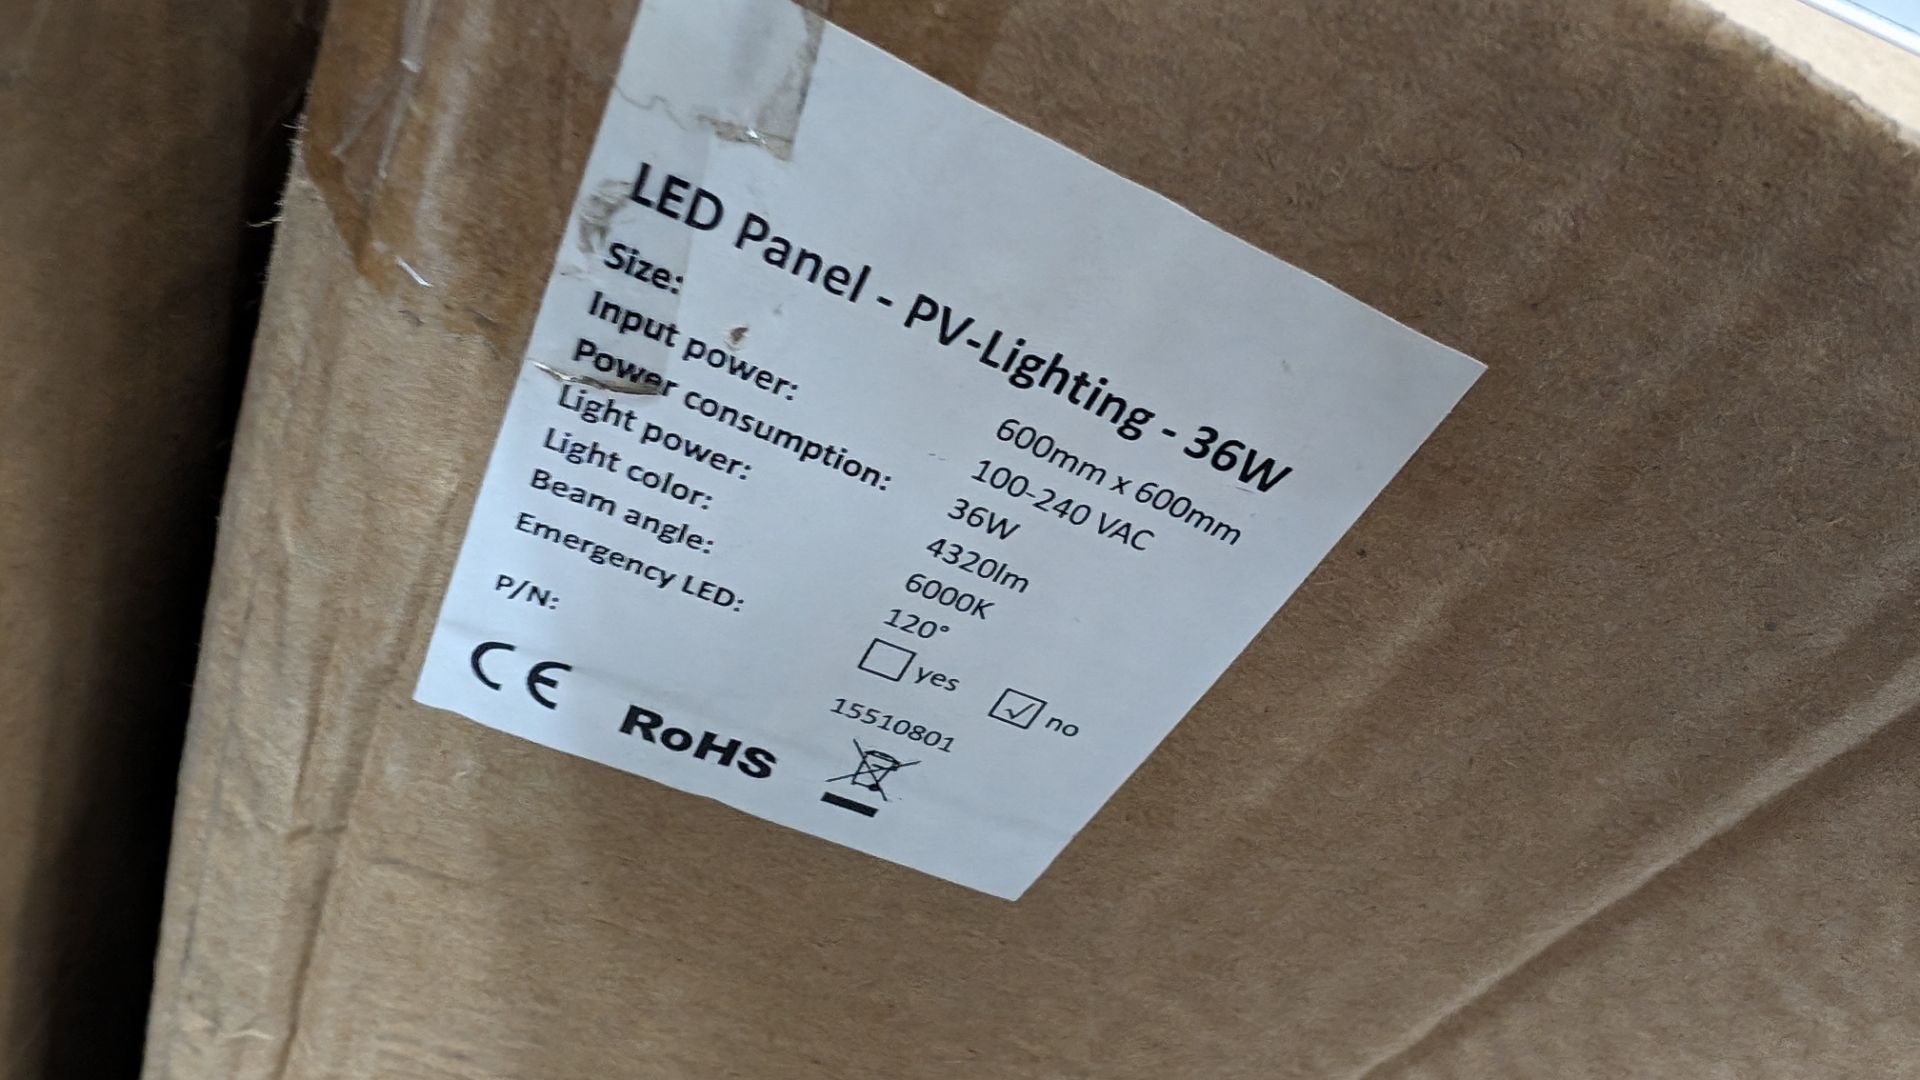 16 off 600mm x 600mm 36w 6000k 4320 lumens cold white LED lighting panels. 36w drivers. This lot c - Image 7 of 16